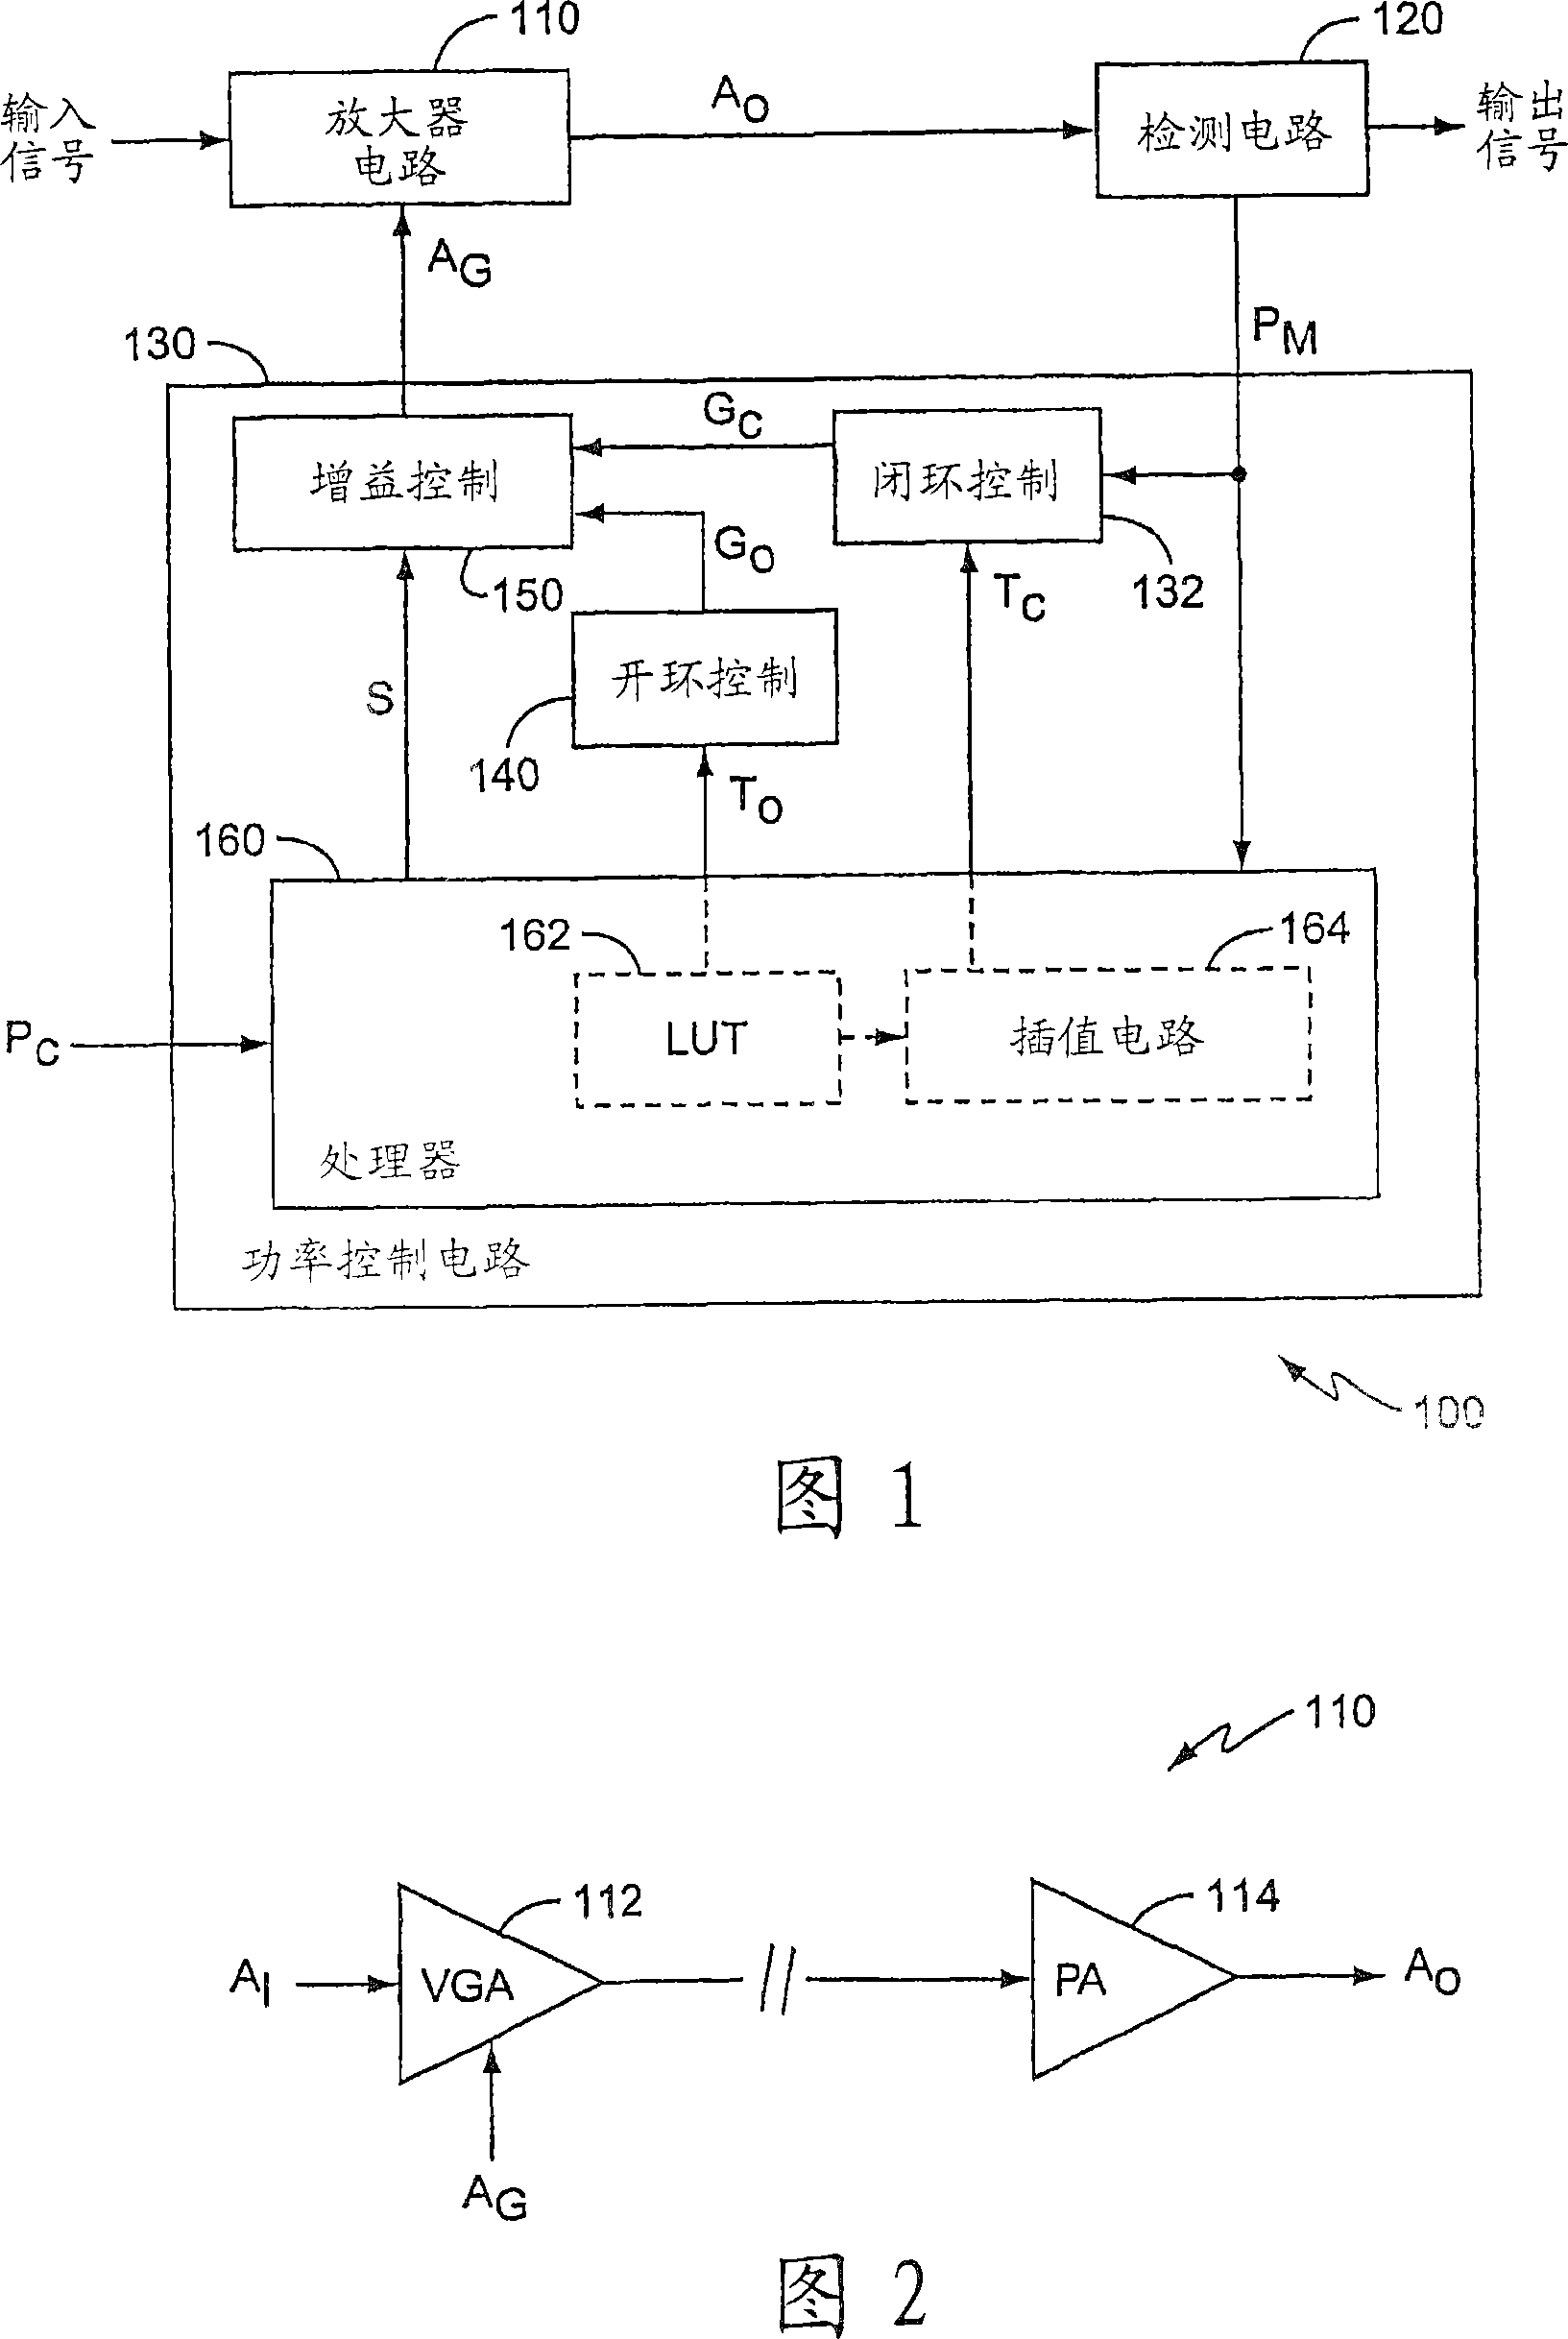 Continuously alternating closed and open loop power control